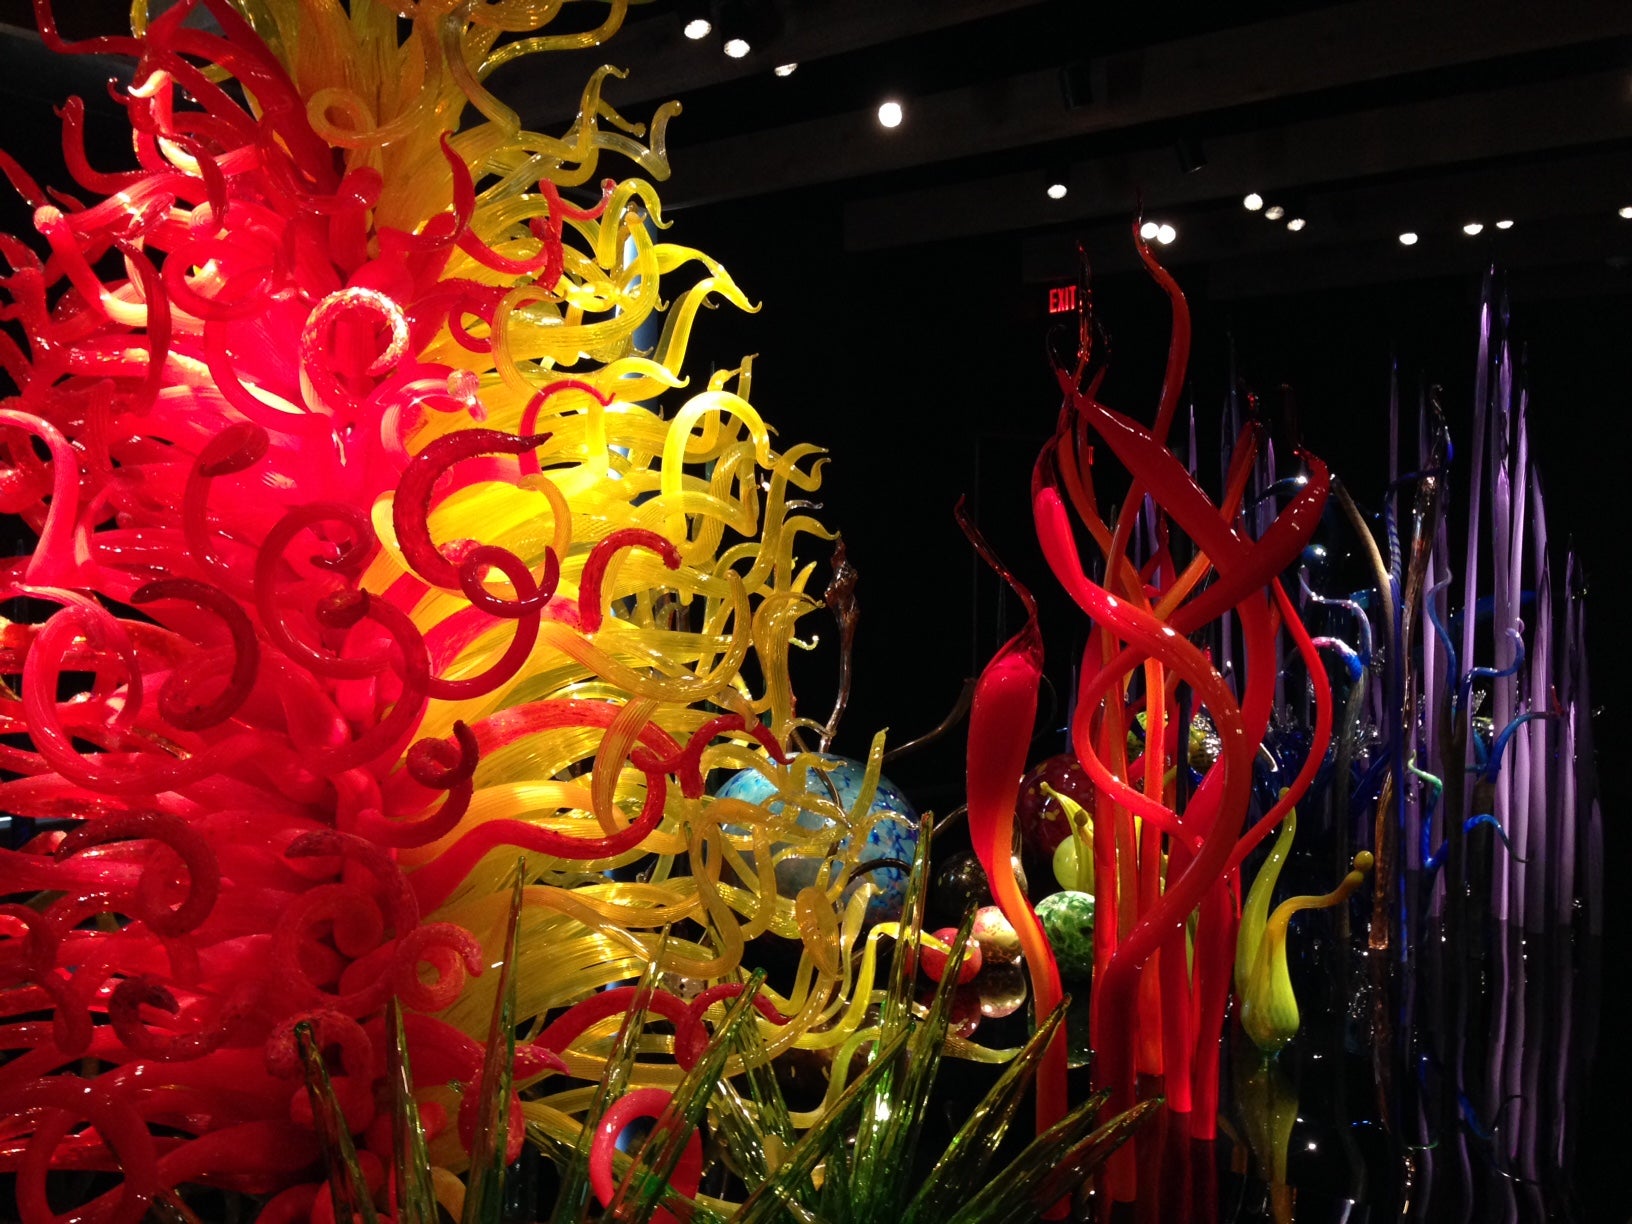 The Chihuly Collection is a permanent exhibit at the Morean Arts Center in St. Petersburg, Florida.